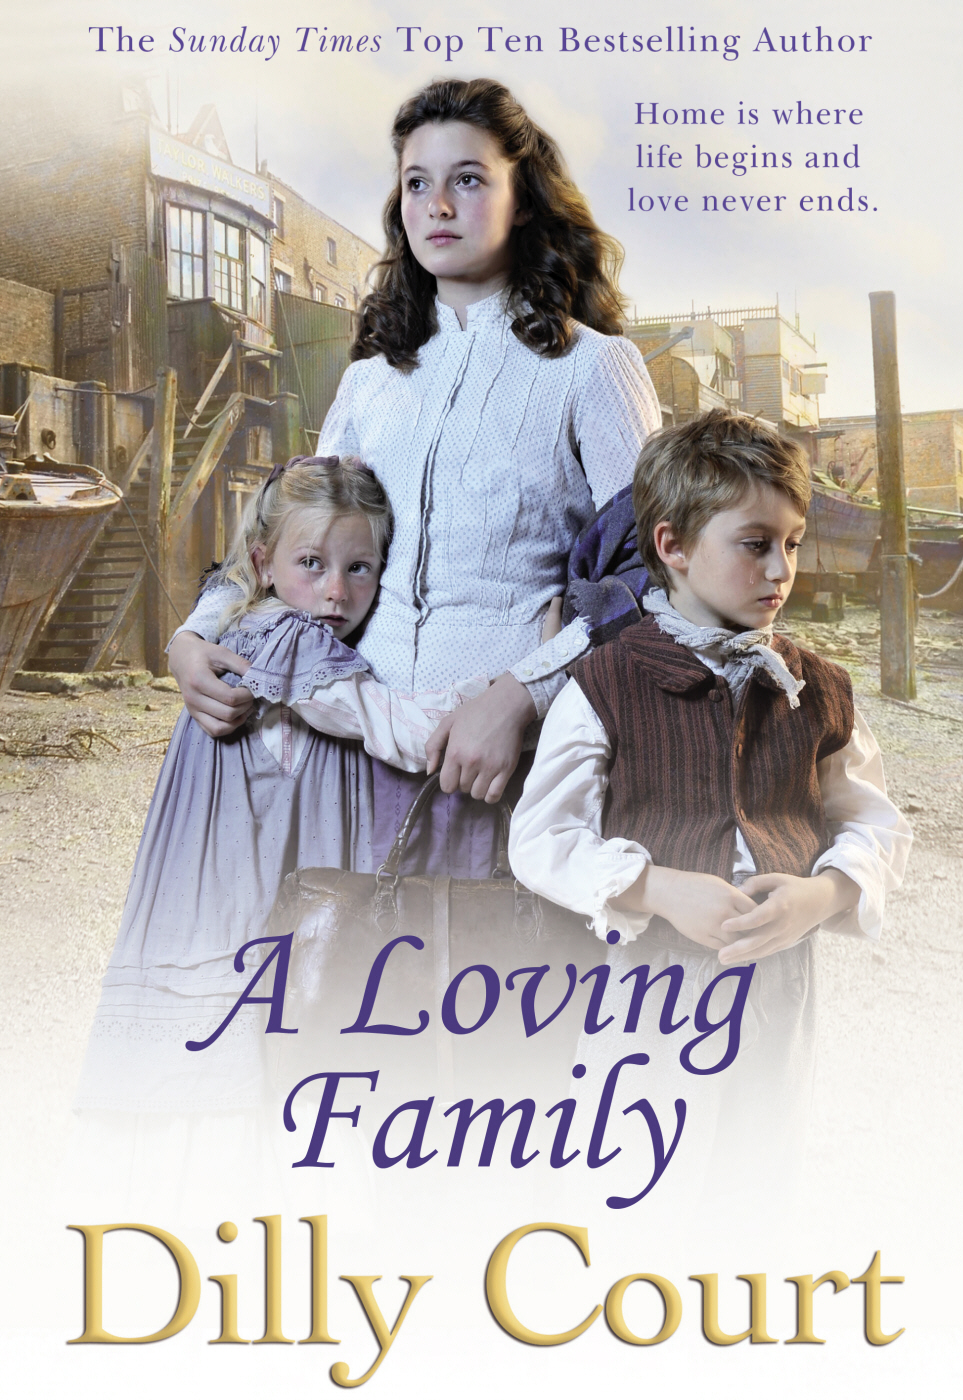 A Loving Family (2013) by Dilly Court